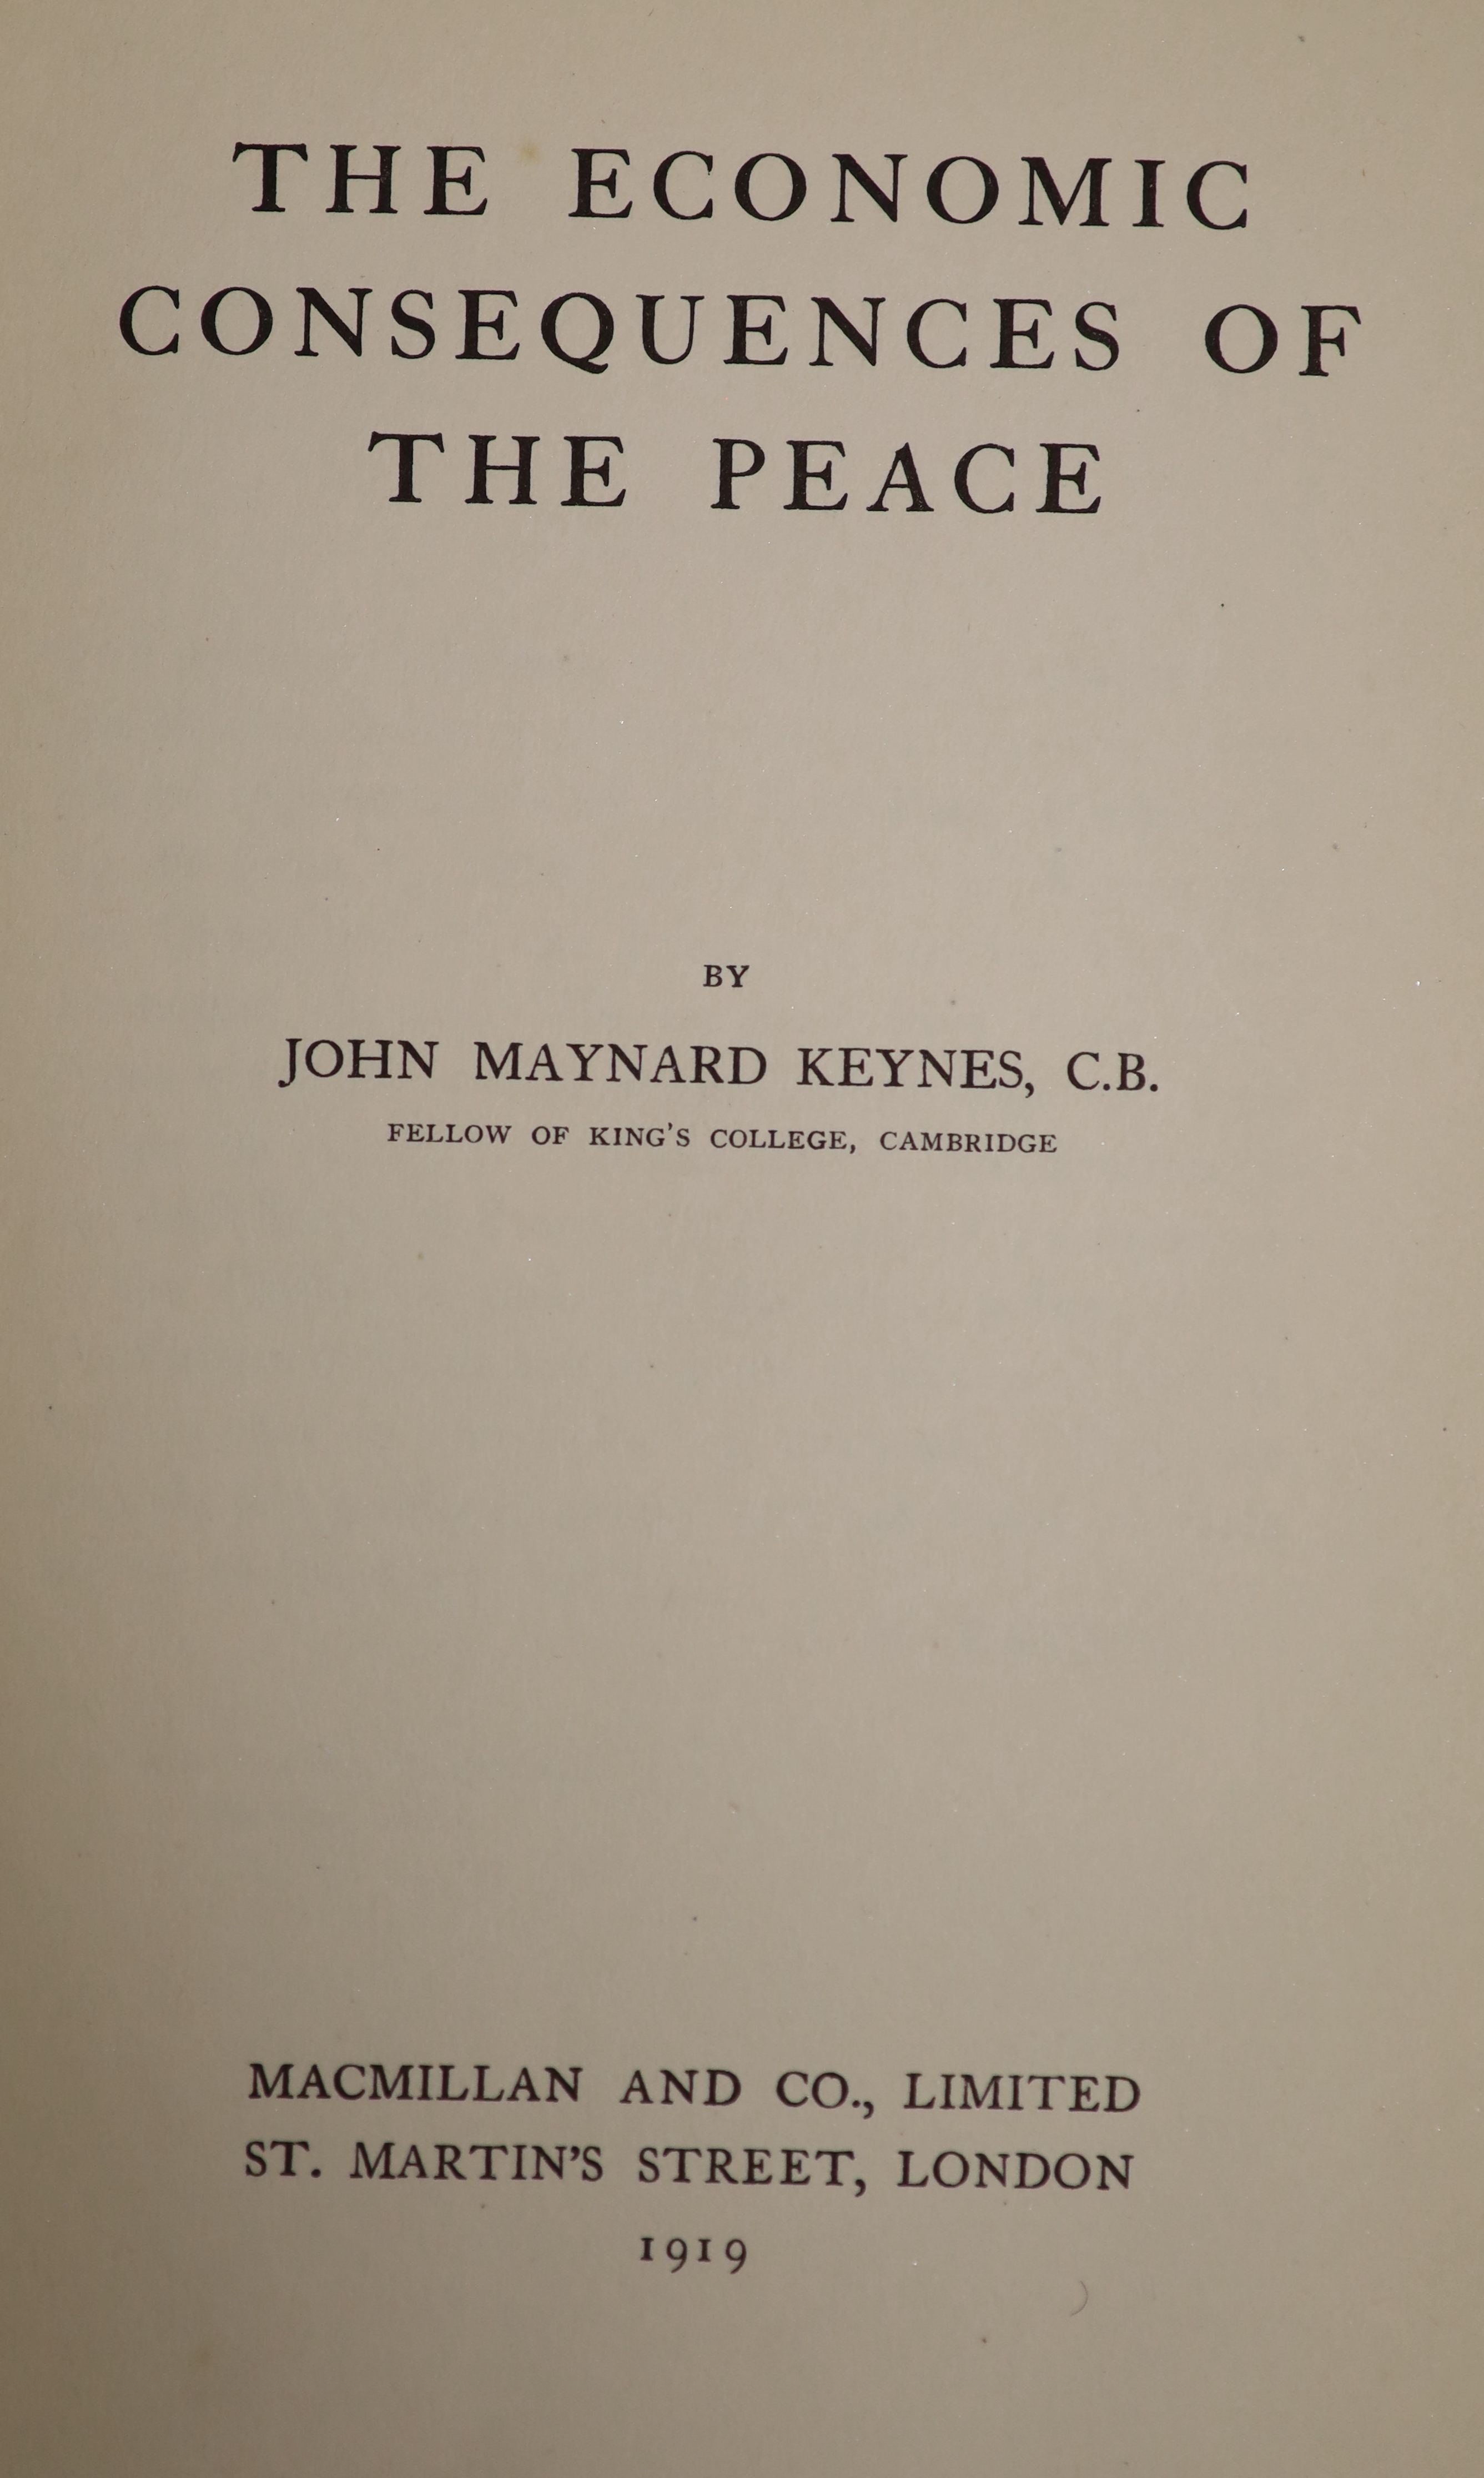 Keynes, John Maynard, 1st Baron - The Economic Consequences of the Peace, 1st edition, 8vo, original cloth, owners inscription to front free endpaper, dated 1919, Macmillan, London, 1919